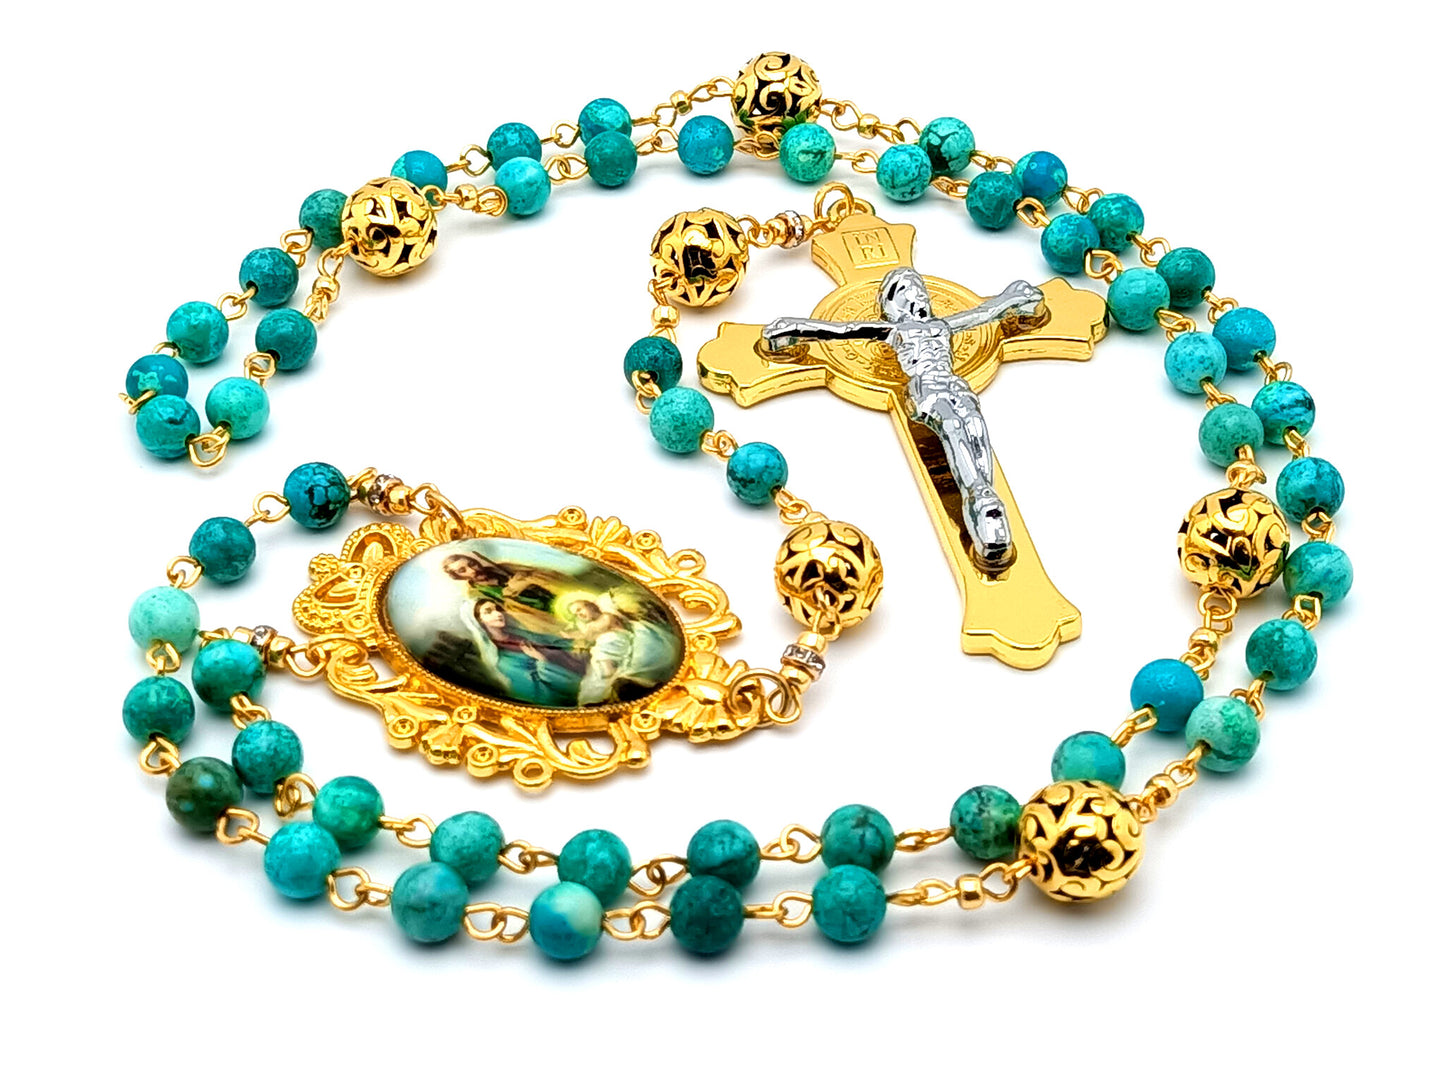 The Nativity unique rosary beads with turquoise gemstone and gold plated Bali beads and Holy Family medal and Saint Benedict gold and silver crucifix.